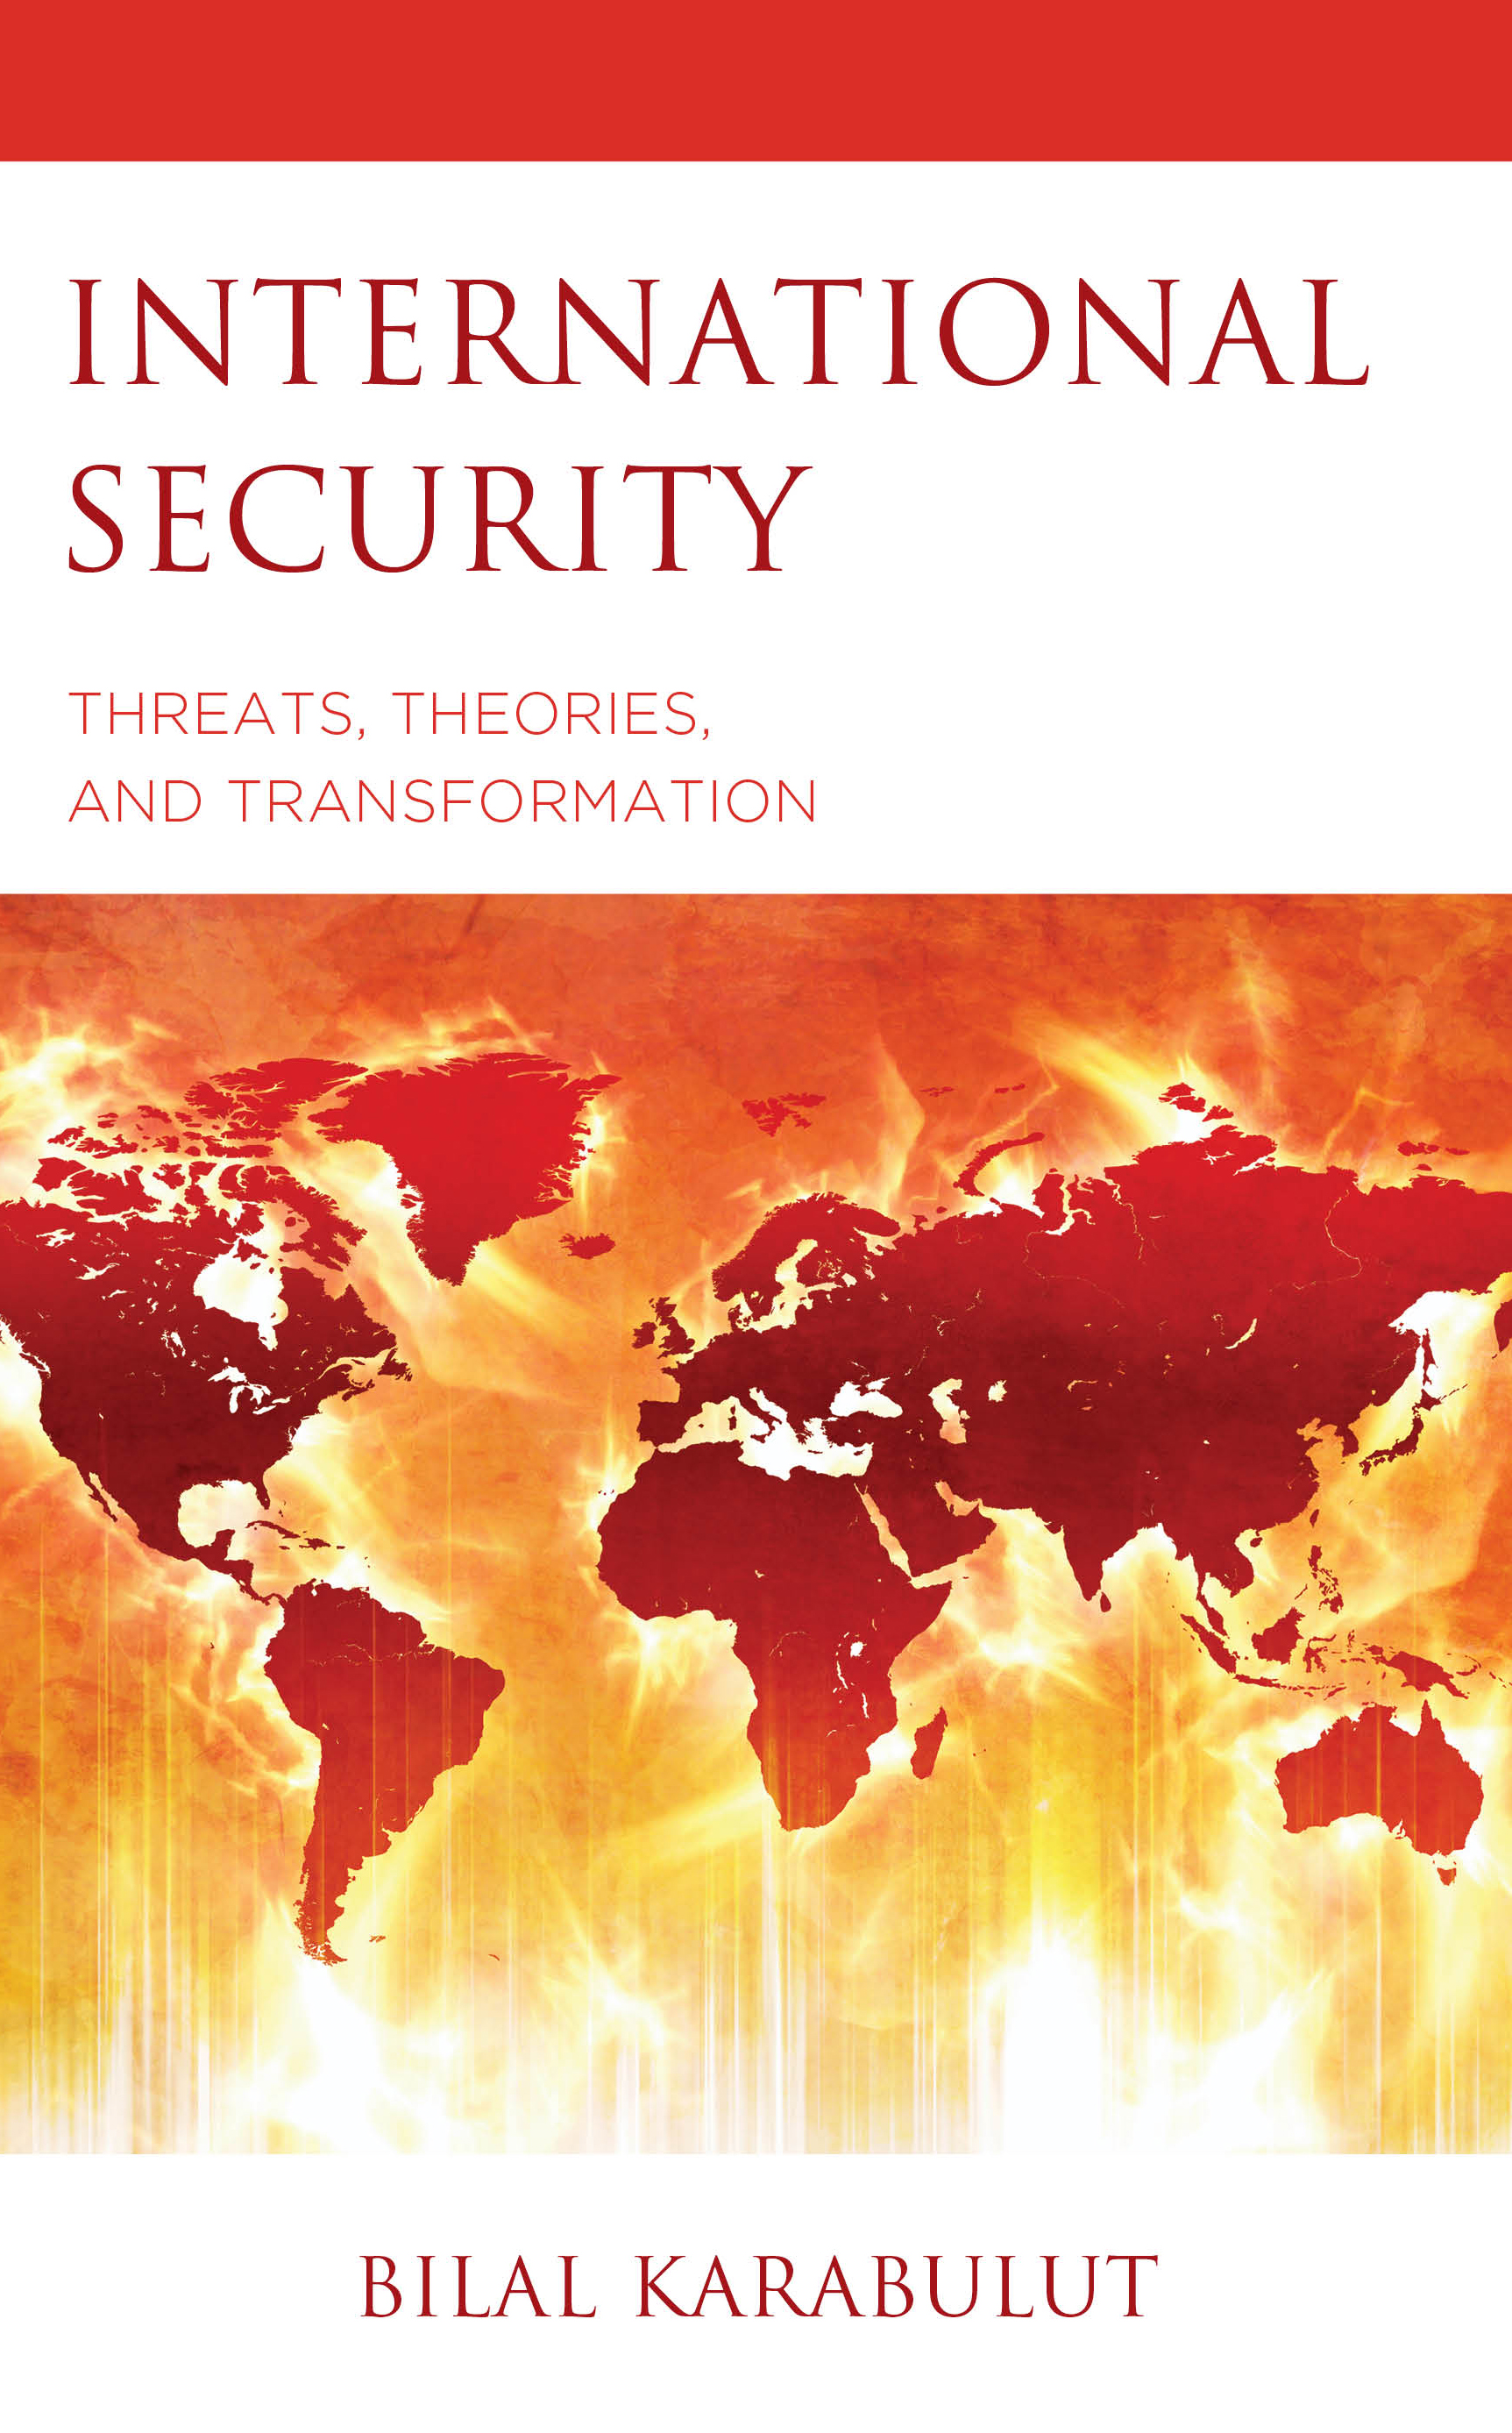 International Security: Threats, Theories, and Transformation